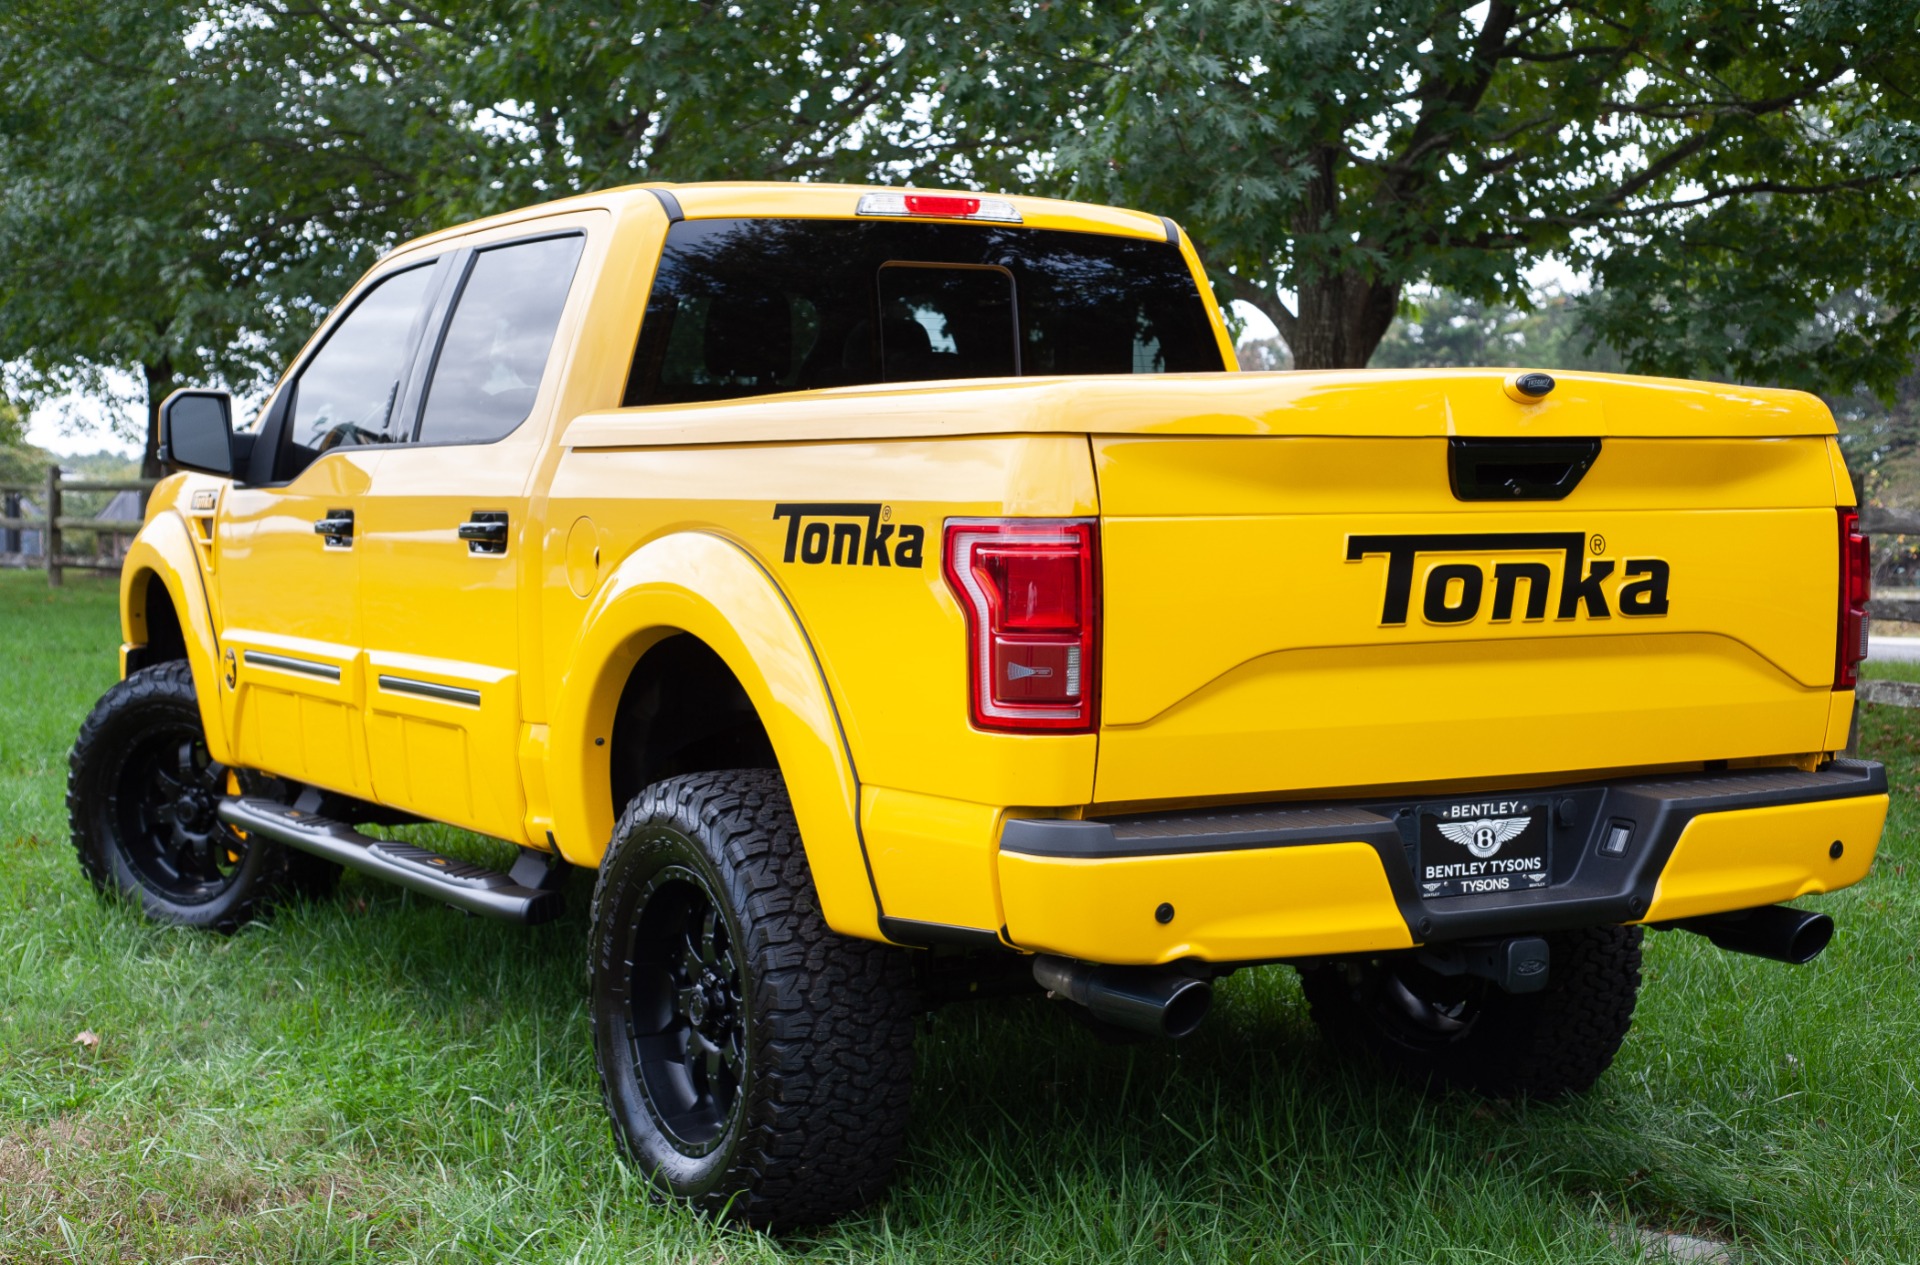 2014 ford tonka truck for sale